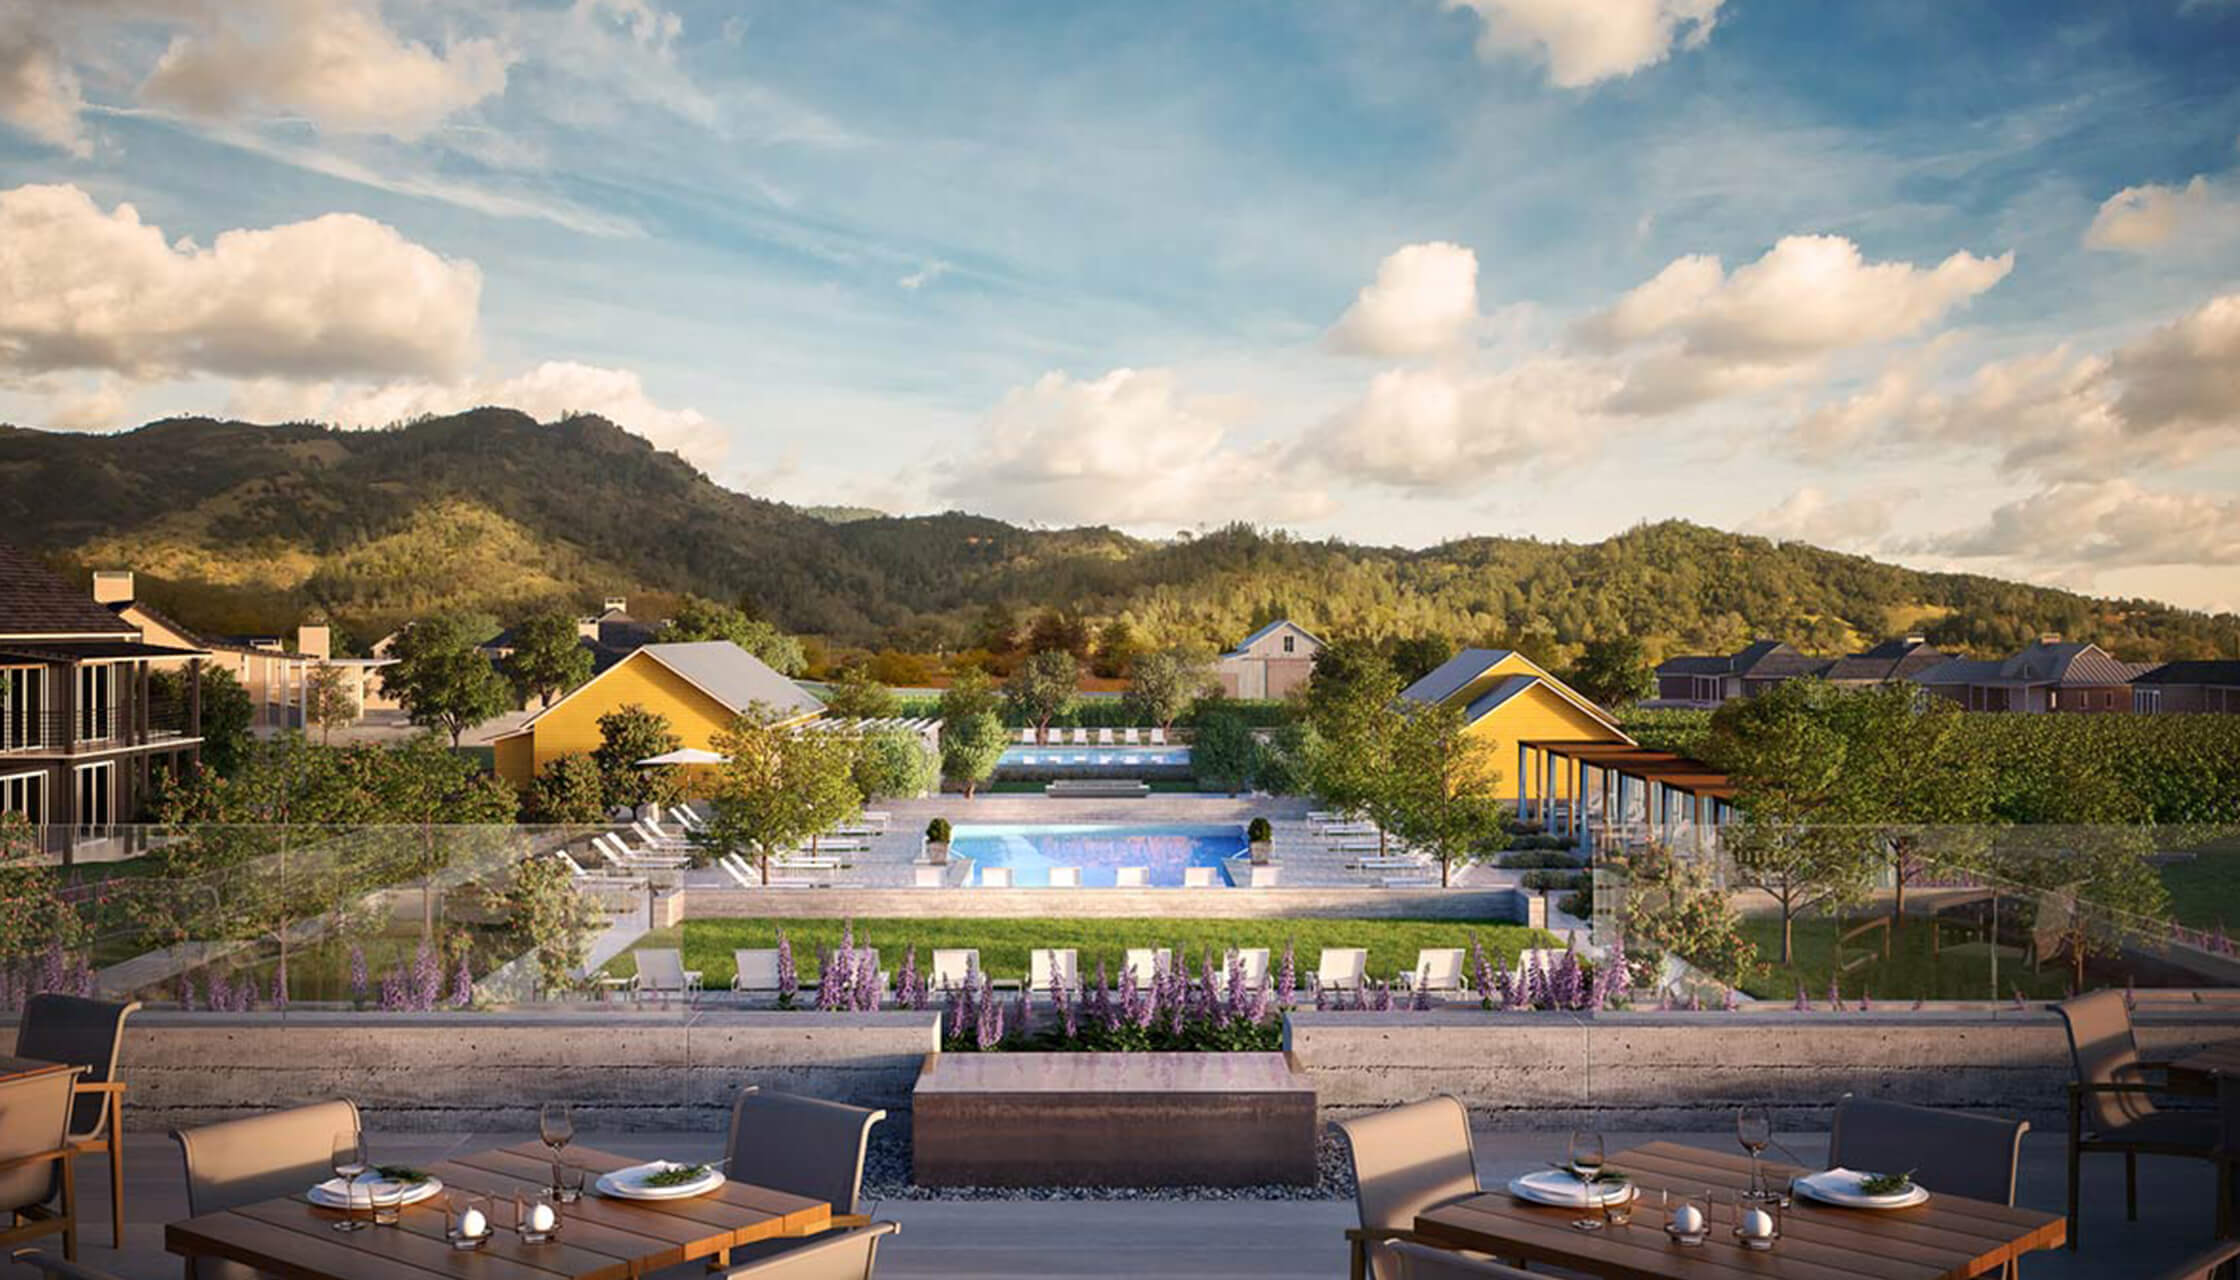 Power Design Awarded Four Seasons Project in Napa Valley